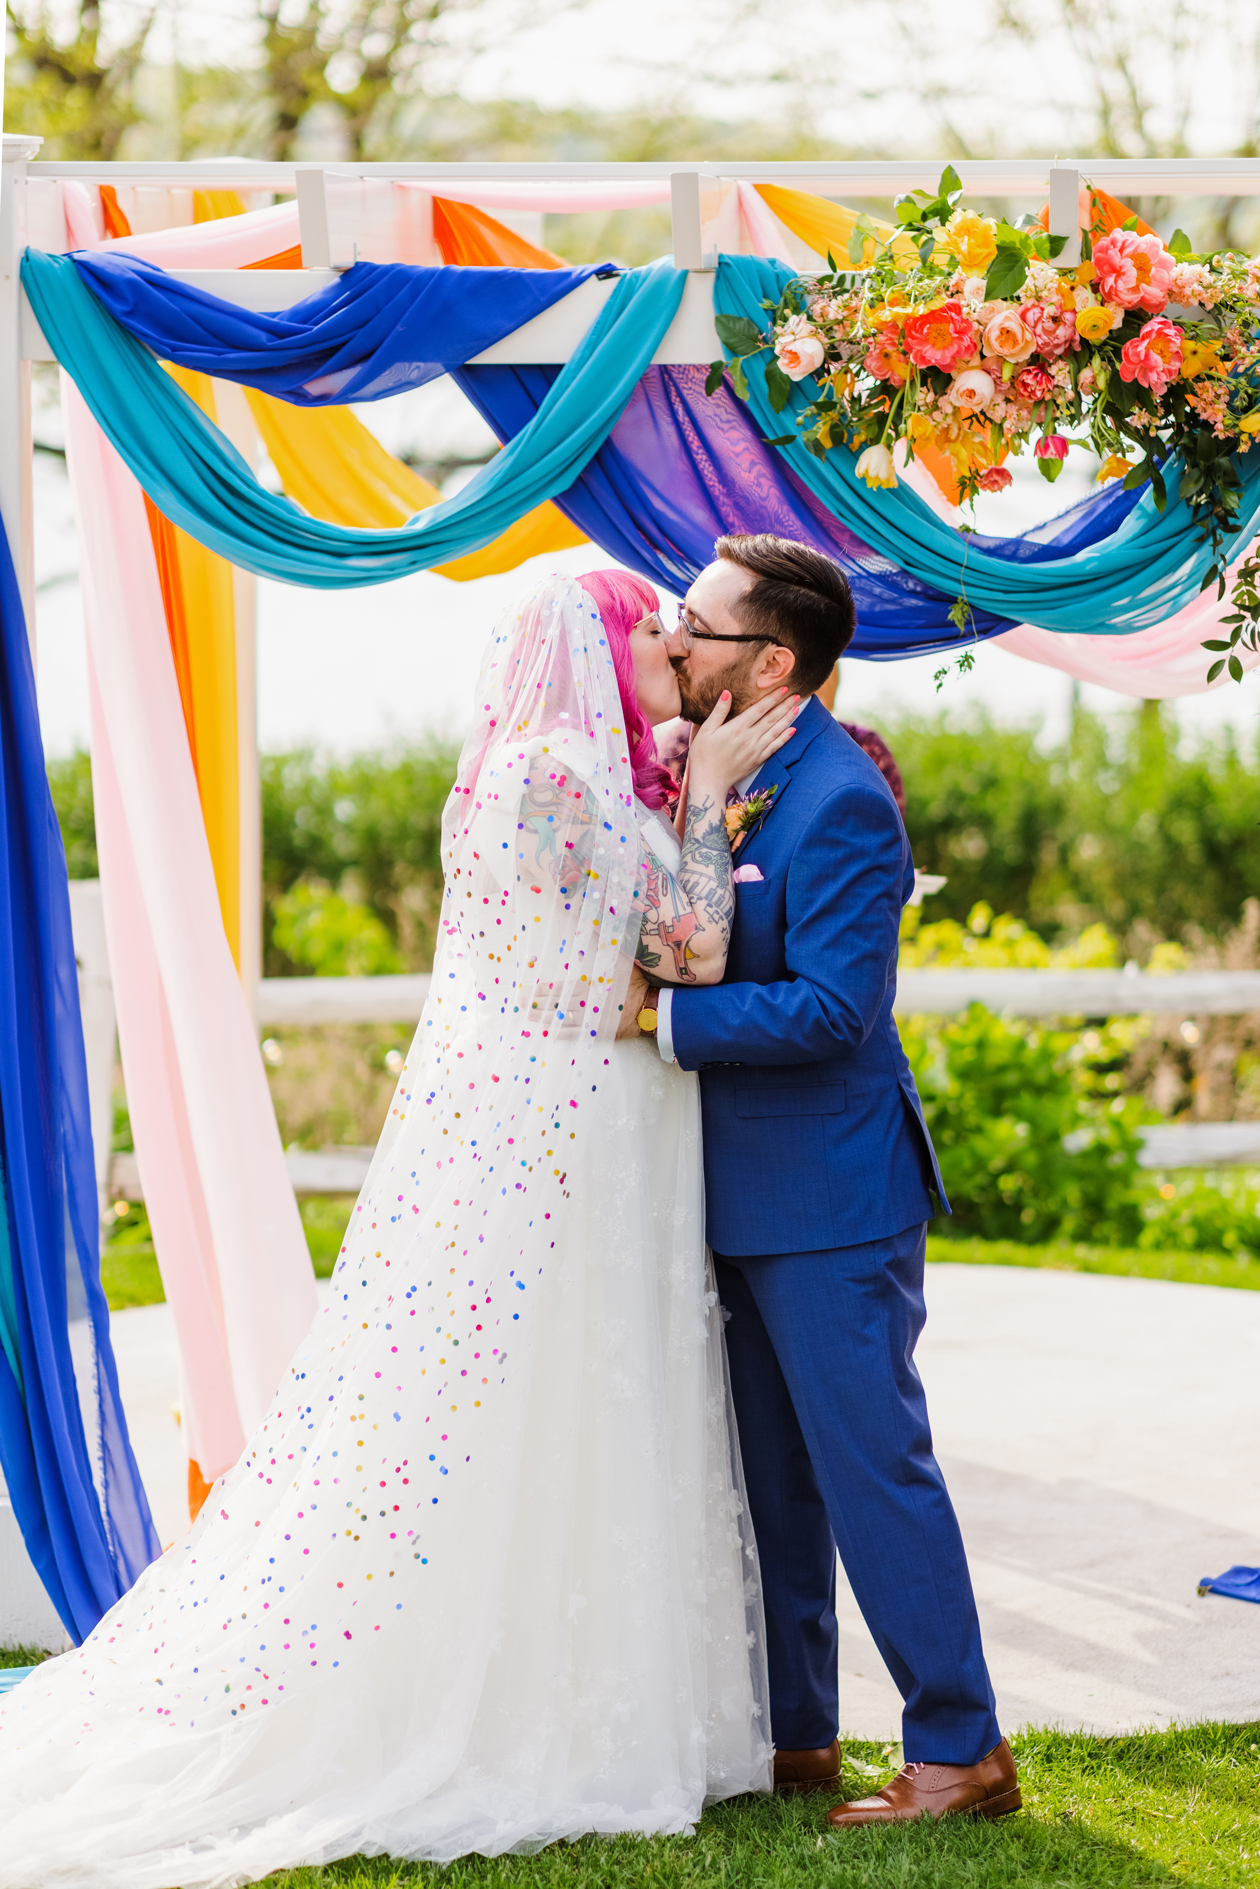 The Crafted Life's Colorful Wedding